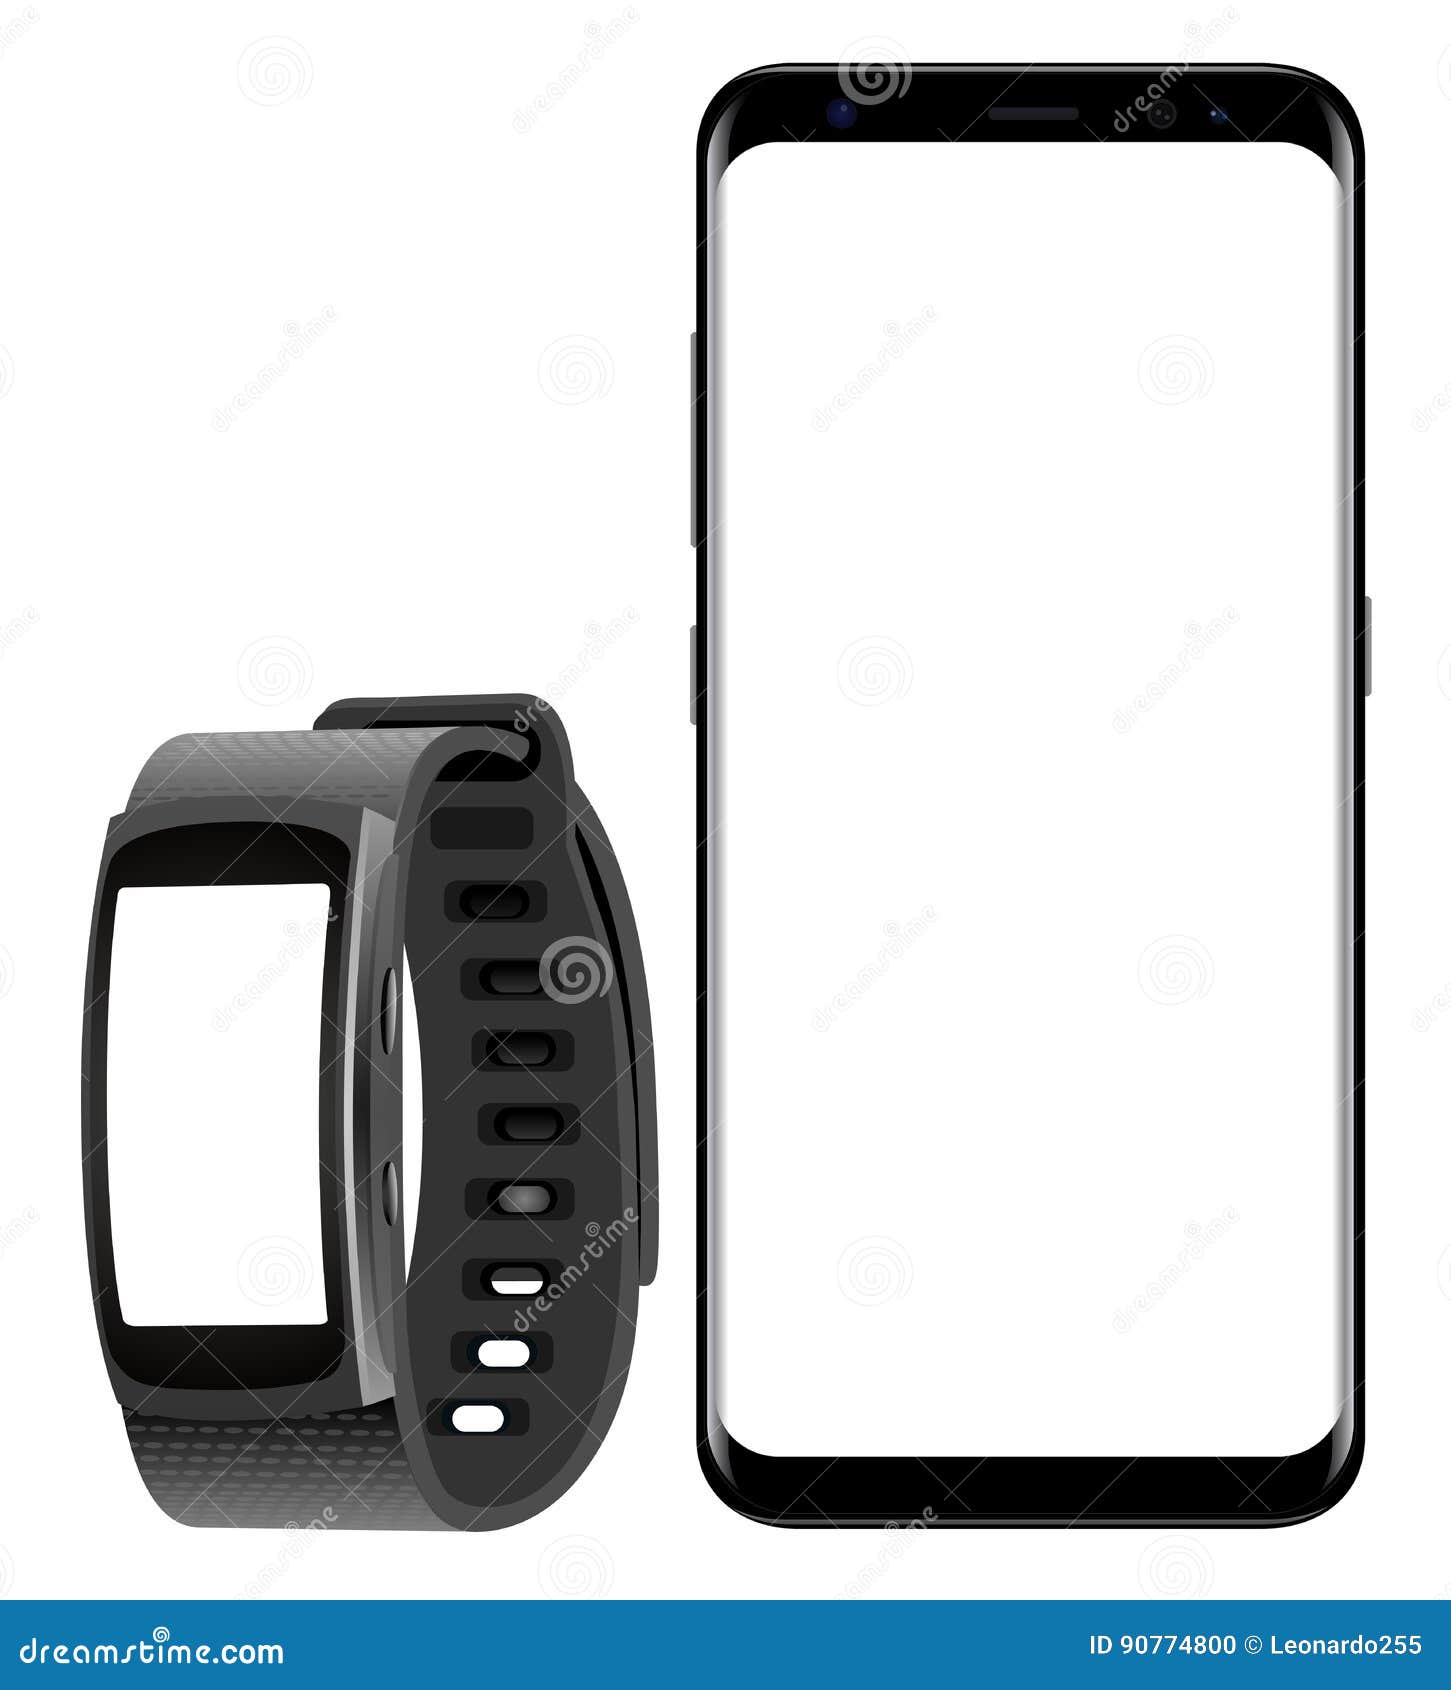 samsung galaxy s8 and smartwatch gear fit